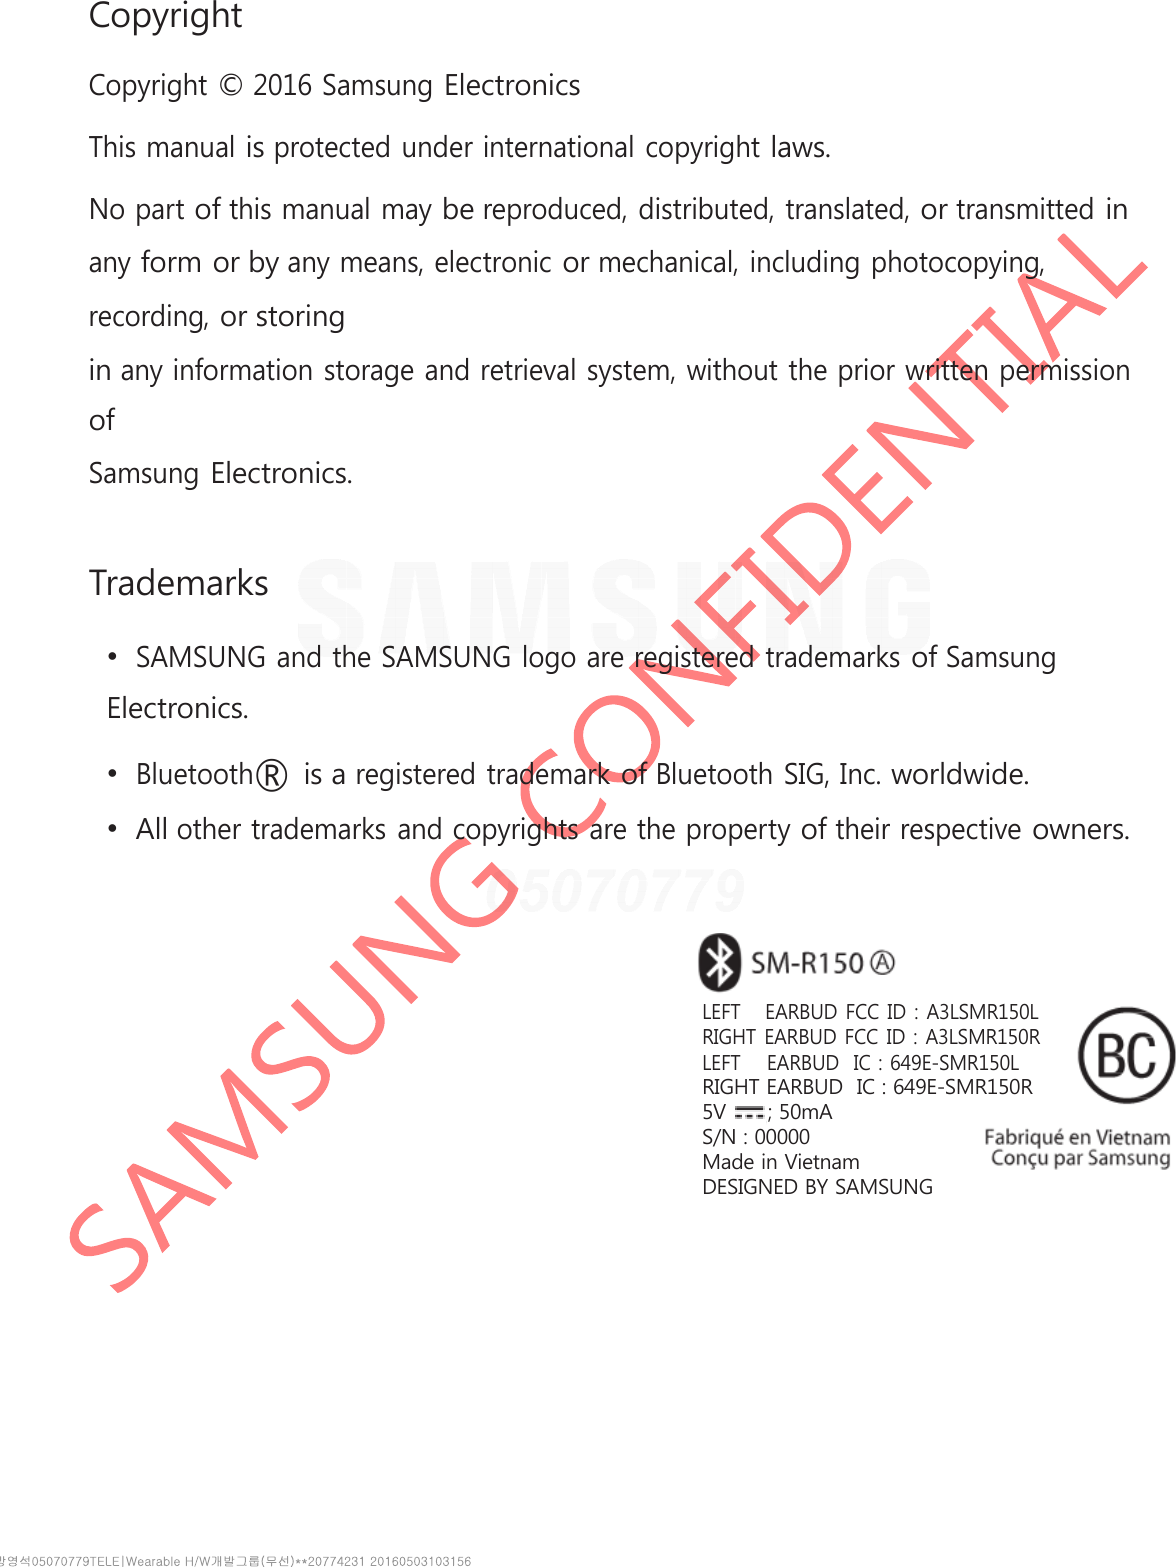 Copyright Copyright © 2016 Samsung Electronics This manual is protected under international copyright laws. No part of this manual may be reproduced, distributed, translated, or transmitted in any form or by any means, electronic or mechanical, including photocopying, recording, or storing in any information storage and retrieval system, without the prior written permission of Samsung Electronics. Trademarks •SAMSUNG and the SAMSUNG logo are registered trademarks of SamsungElectronics. •Bluetooth® is a registered trademark of Bluetooth SIG, Inc. worldwide.•All other trademarks and copyrights are the property of their respective owners.LEFT   EARBUD FCC ID : A3LSMR150LRIGHT EARBUD FCC ID : A3LSMR150RLEFT    EARBUD  IC : 649E-SMR150LRIGHT EARBUD  IC : 649E-SMR150R5V      ; 50mAS/N : 00000Made in VietnamDESIGNED BY SAMSUNG